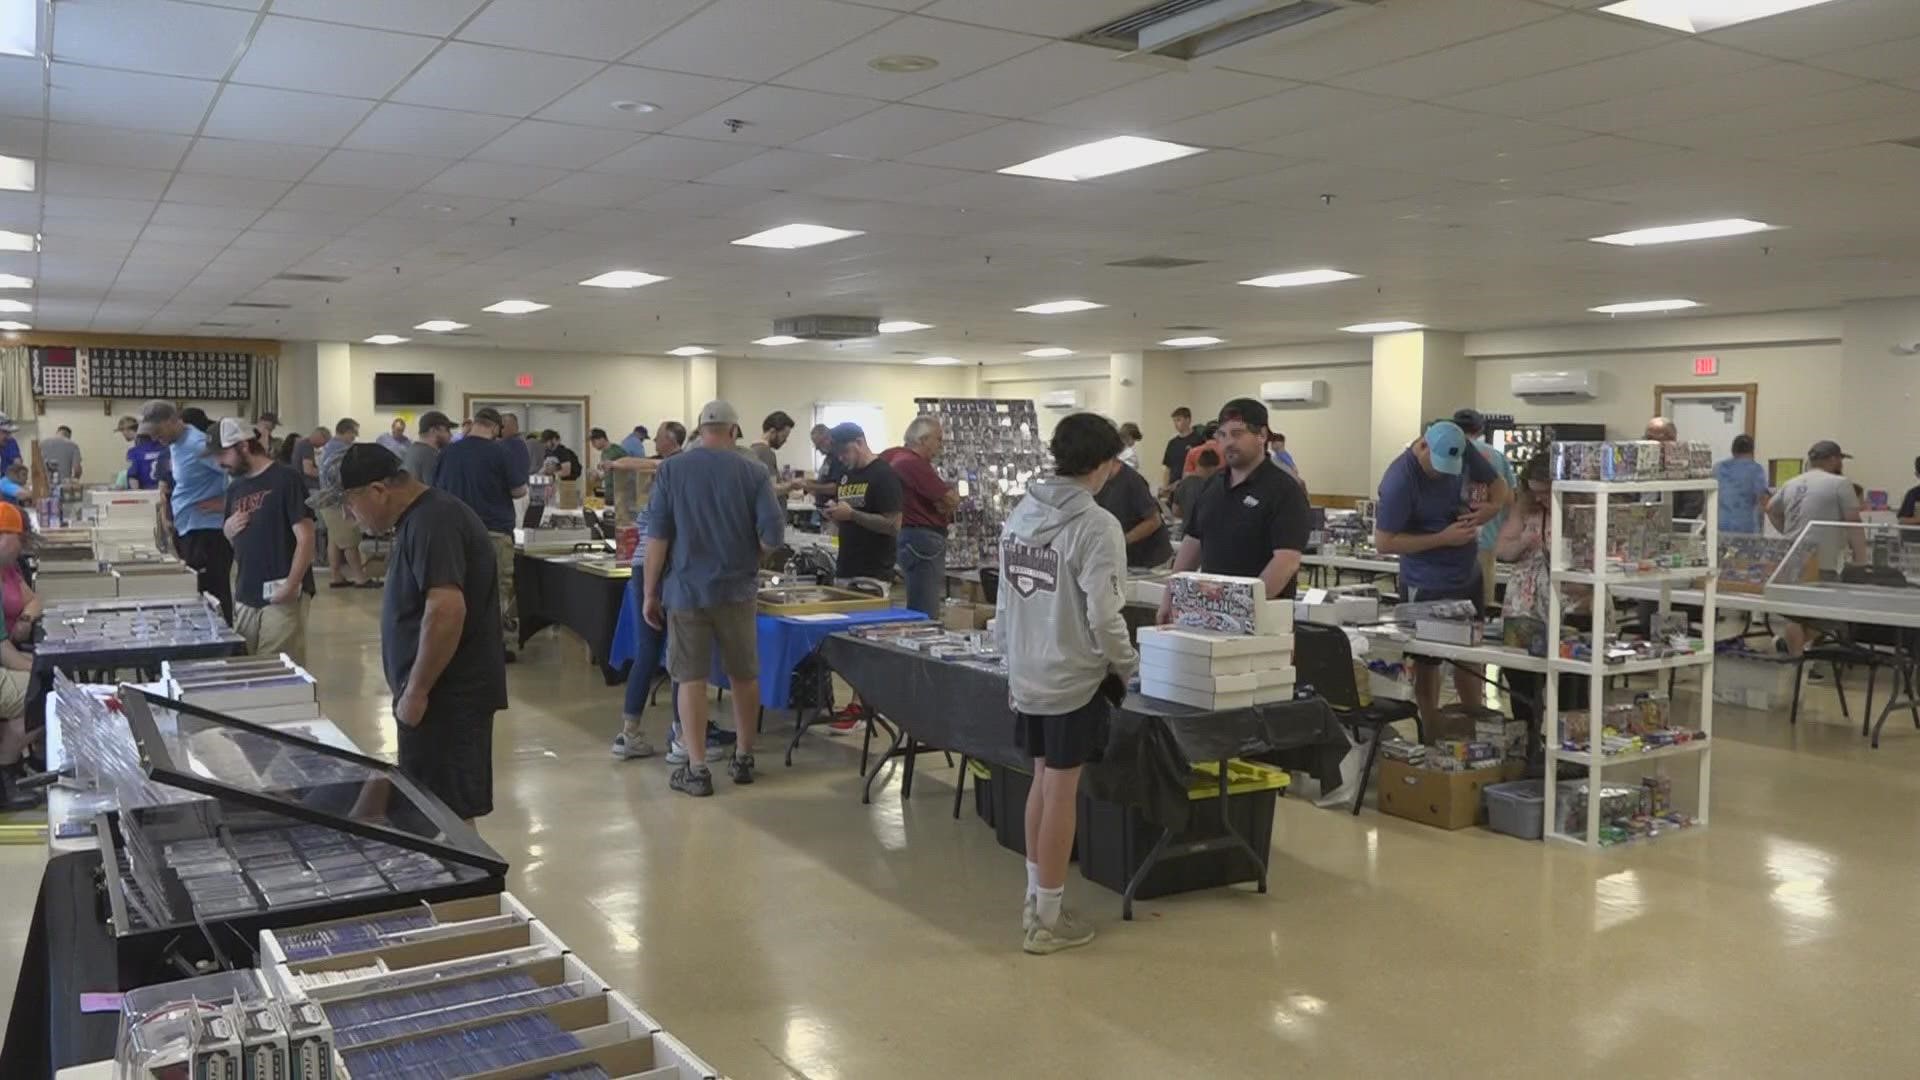 Folks gathered at the Elks Lodge in Bangor on Saturday, August 13 for a sports collectibles and memorabilia show, held every two months.